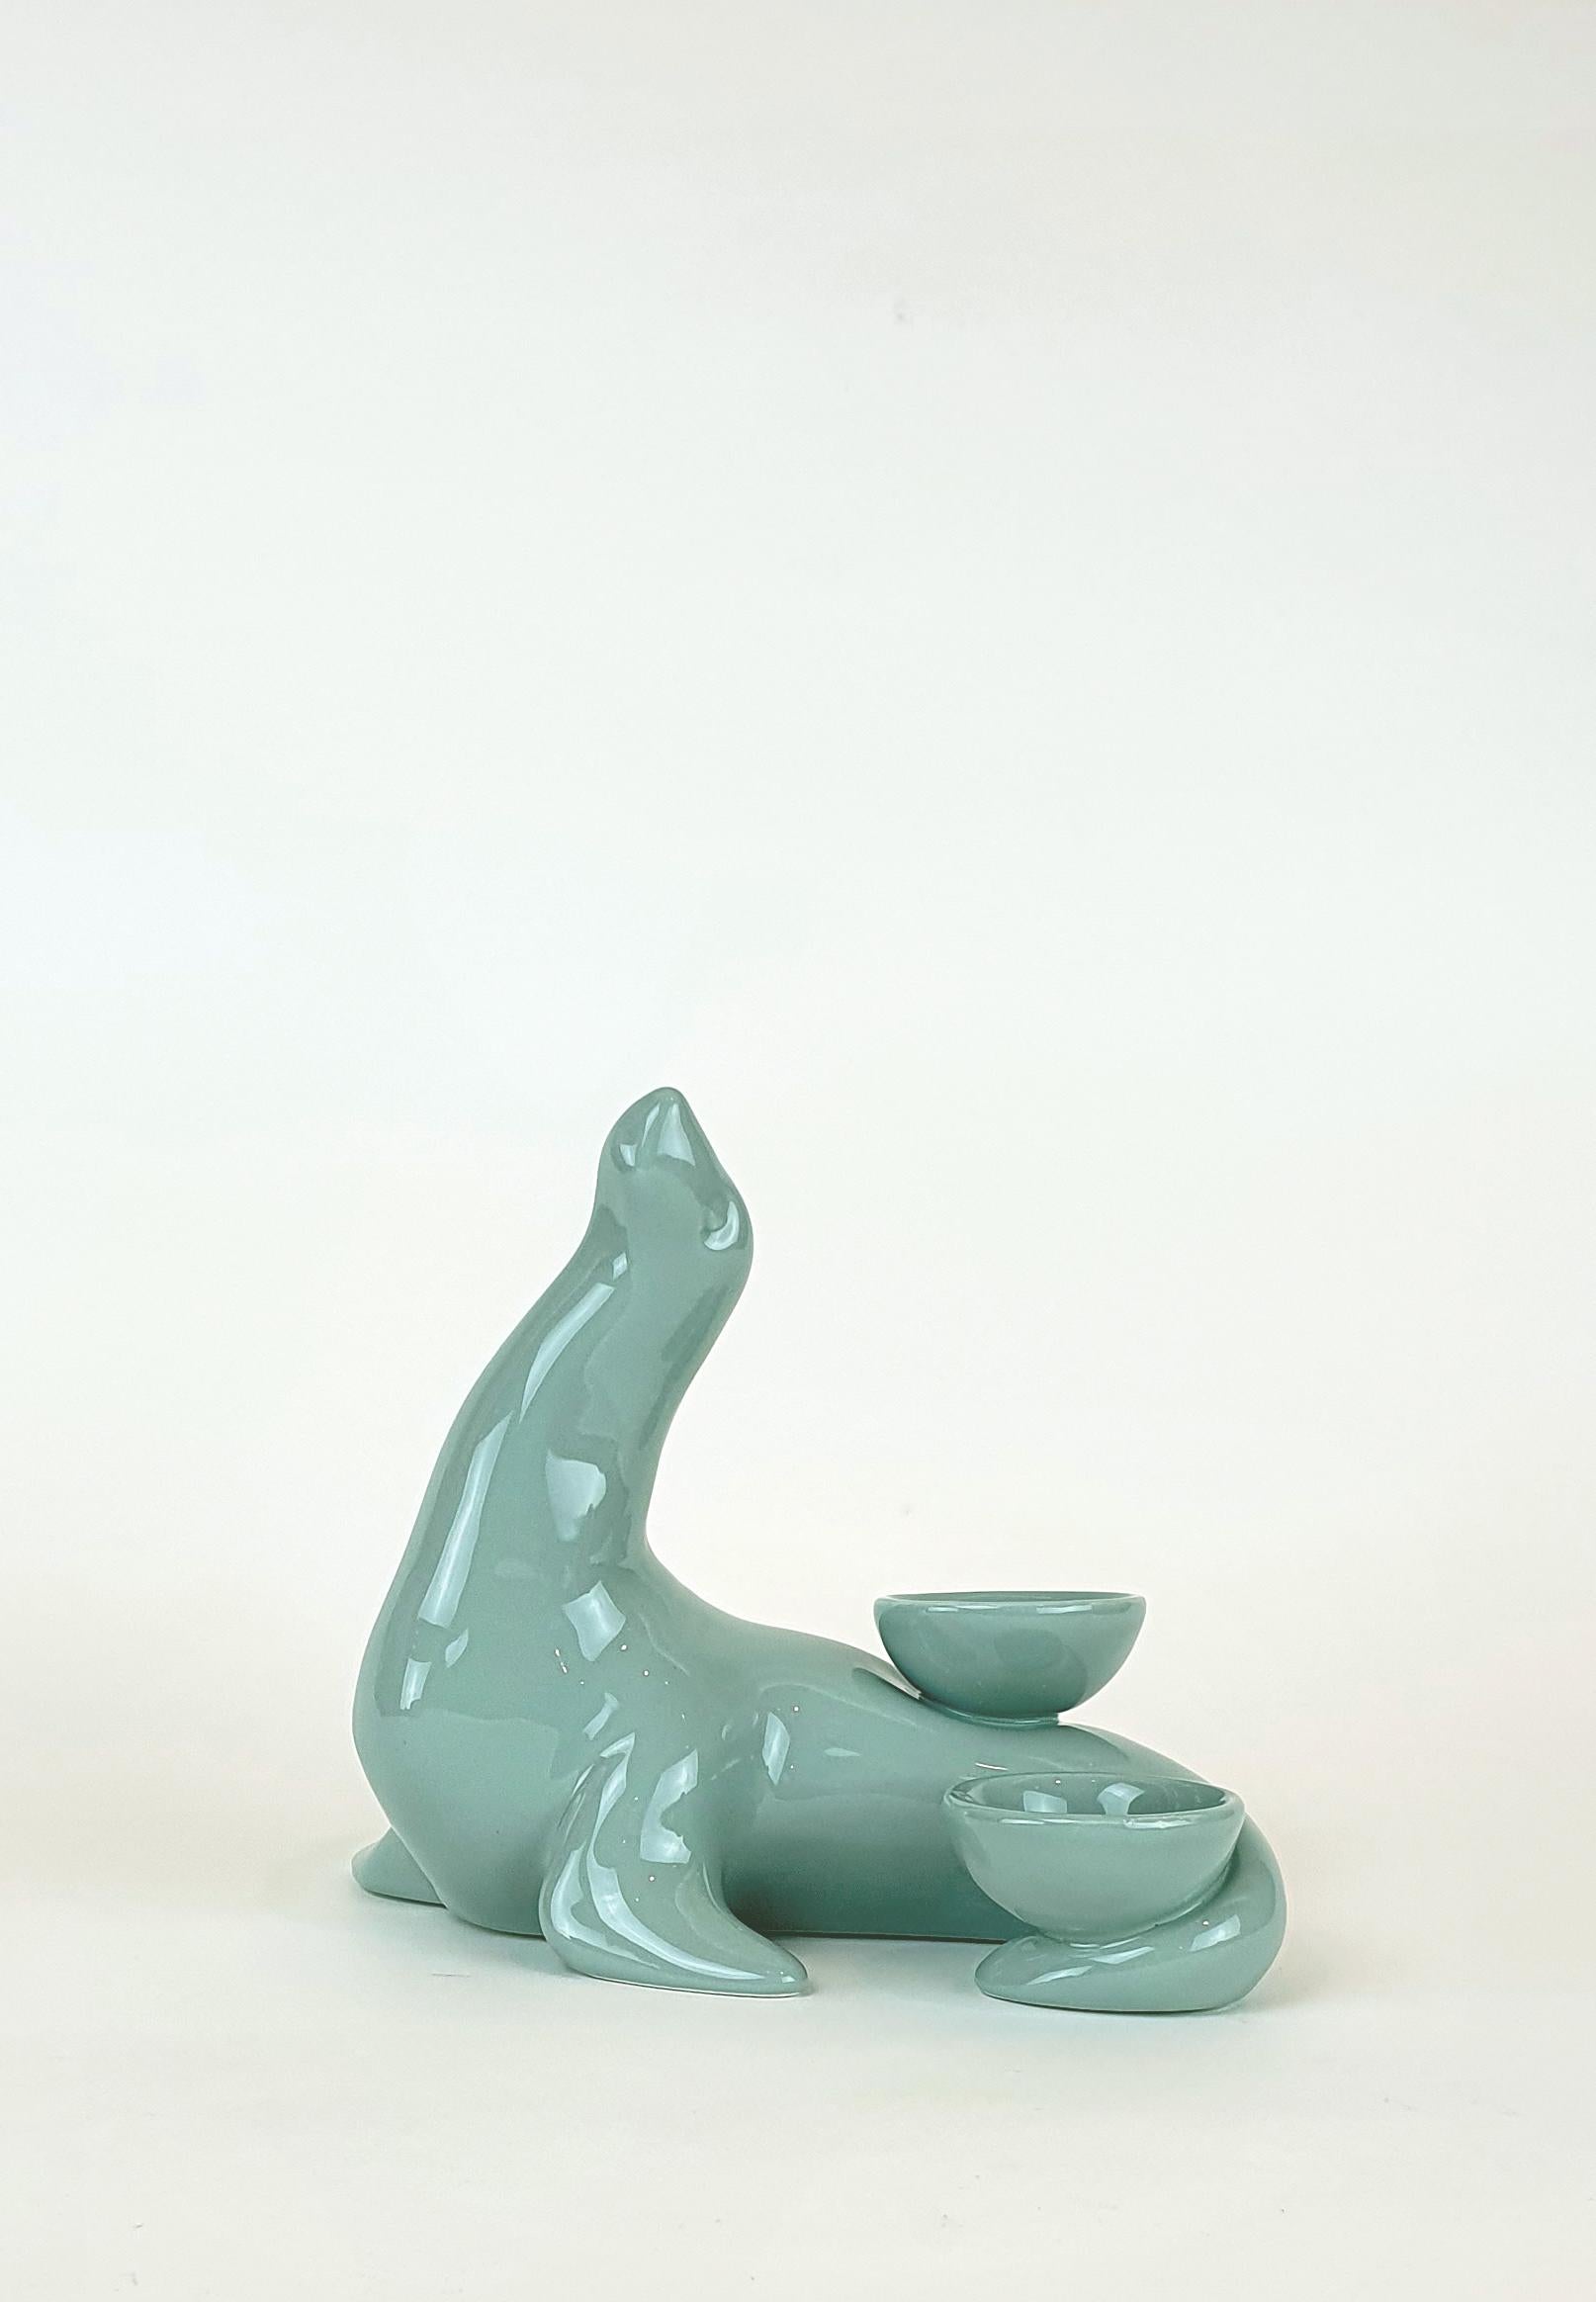 This seal is part of an original collection of candle holder animals. The realization of the shape takes place through a mold with liquid clay; tiled and hand painted in a vast range of colours, from the most delicate pastels to the more saturated